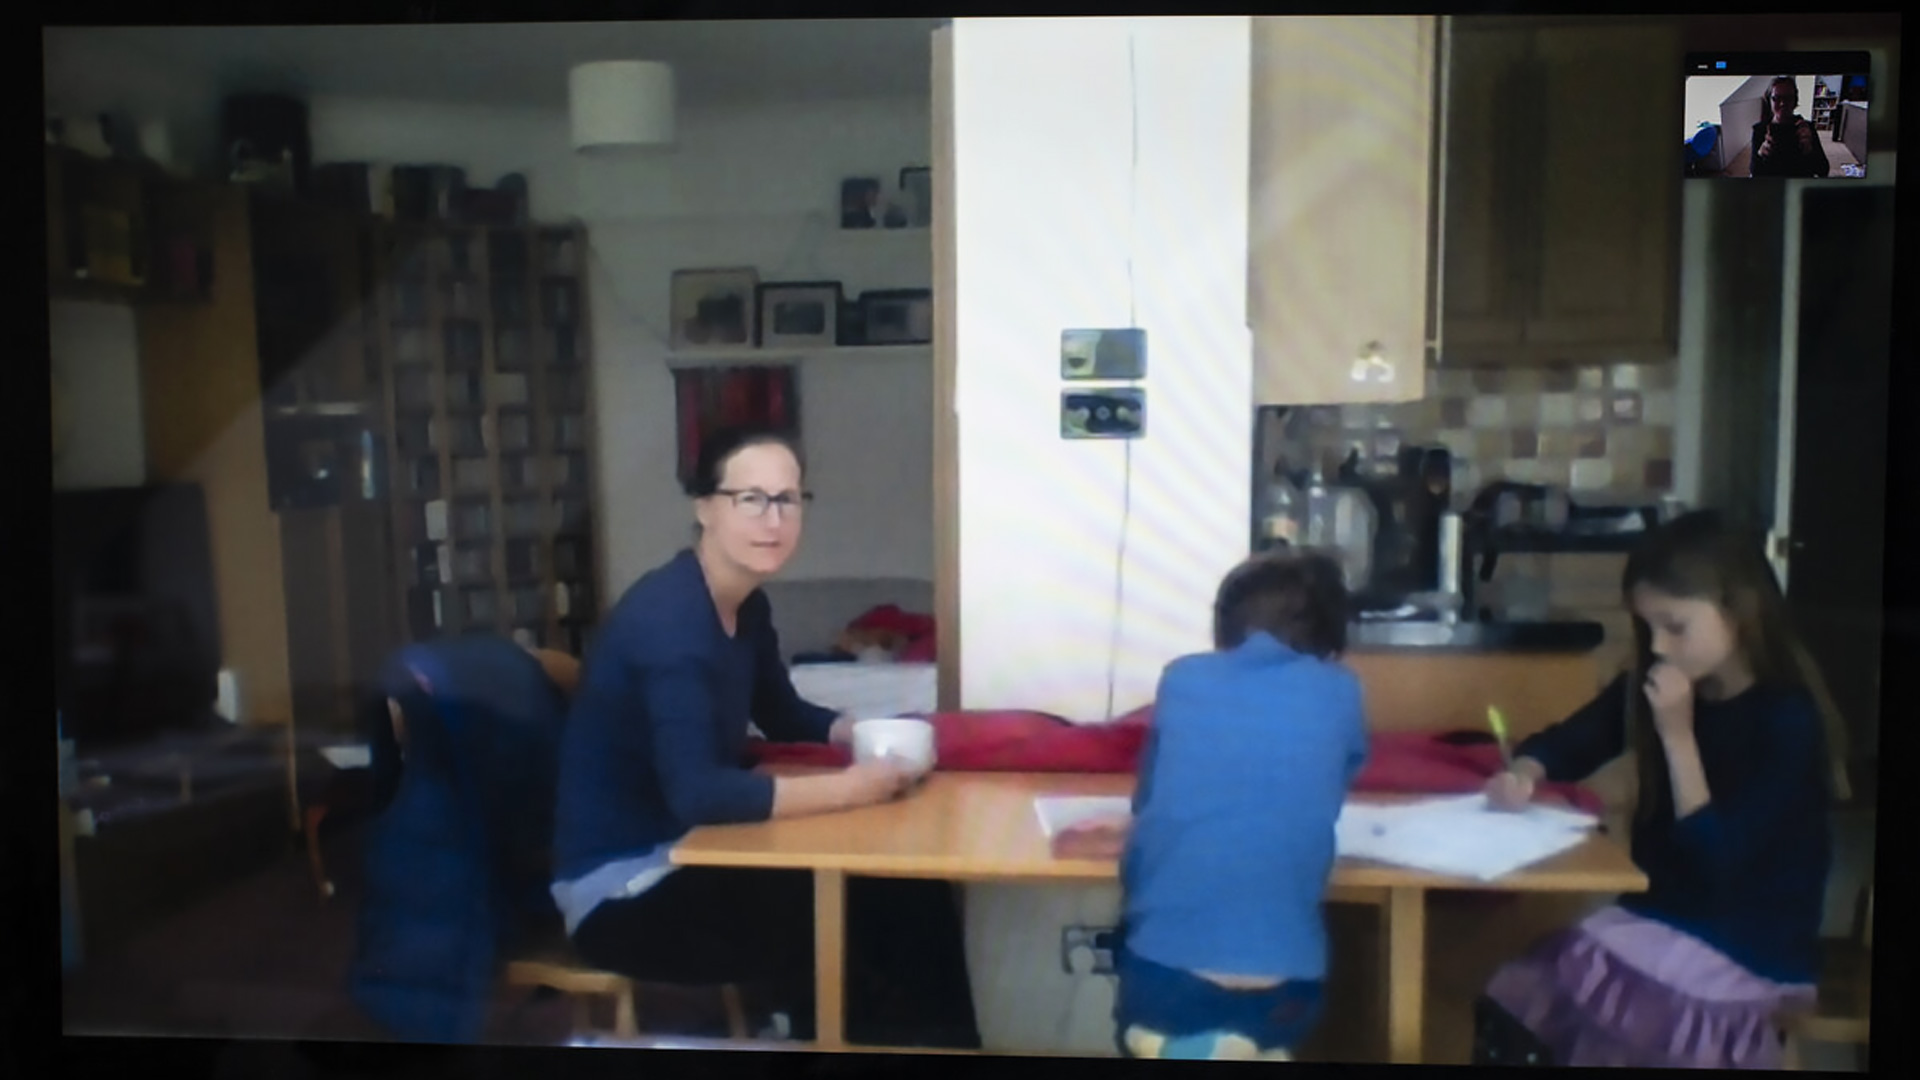 Sophy, her son and daughter sit at a table between the lounge and kitchen whilst the children do schoolwork.